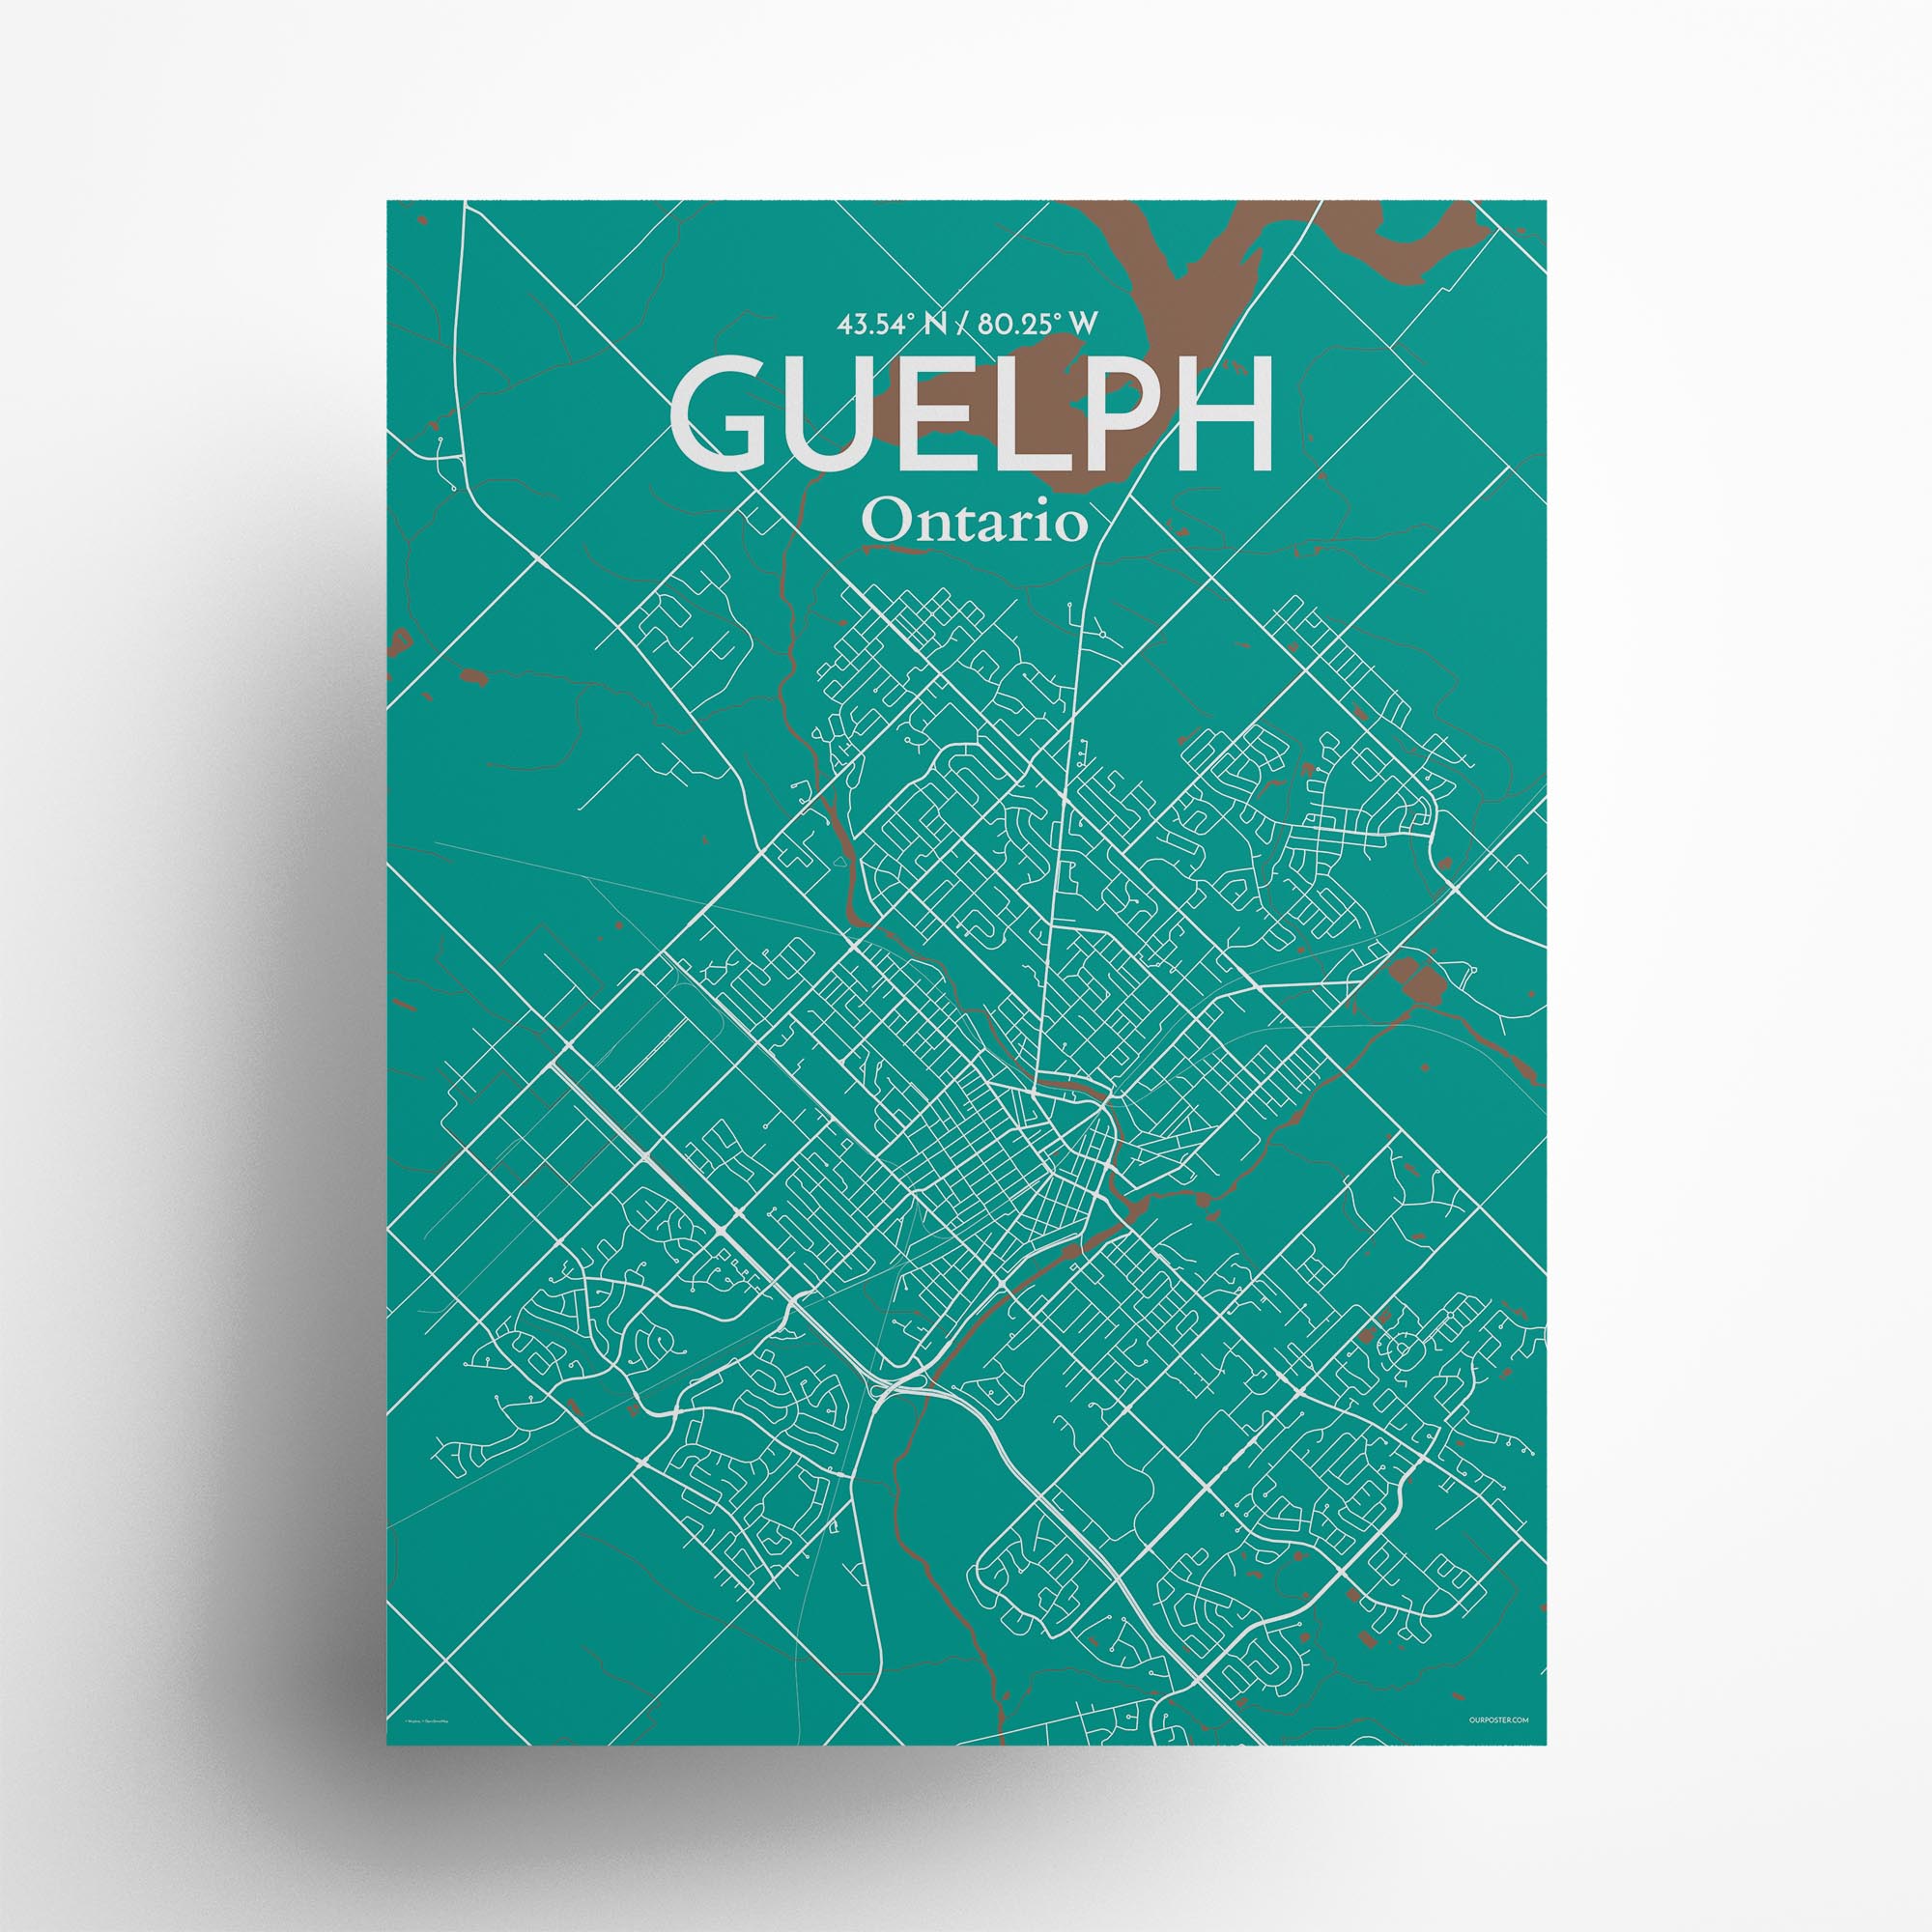 Guelph city map poster in Nature of size 18" x 24"